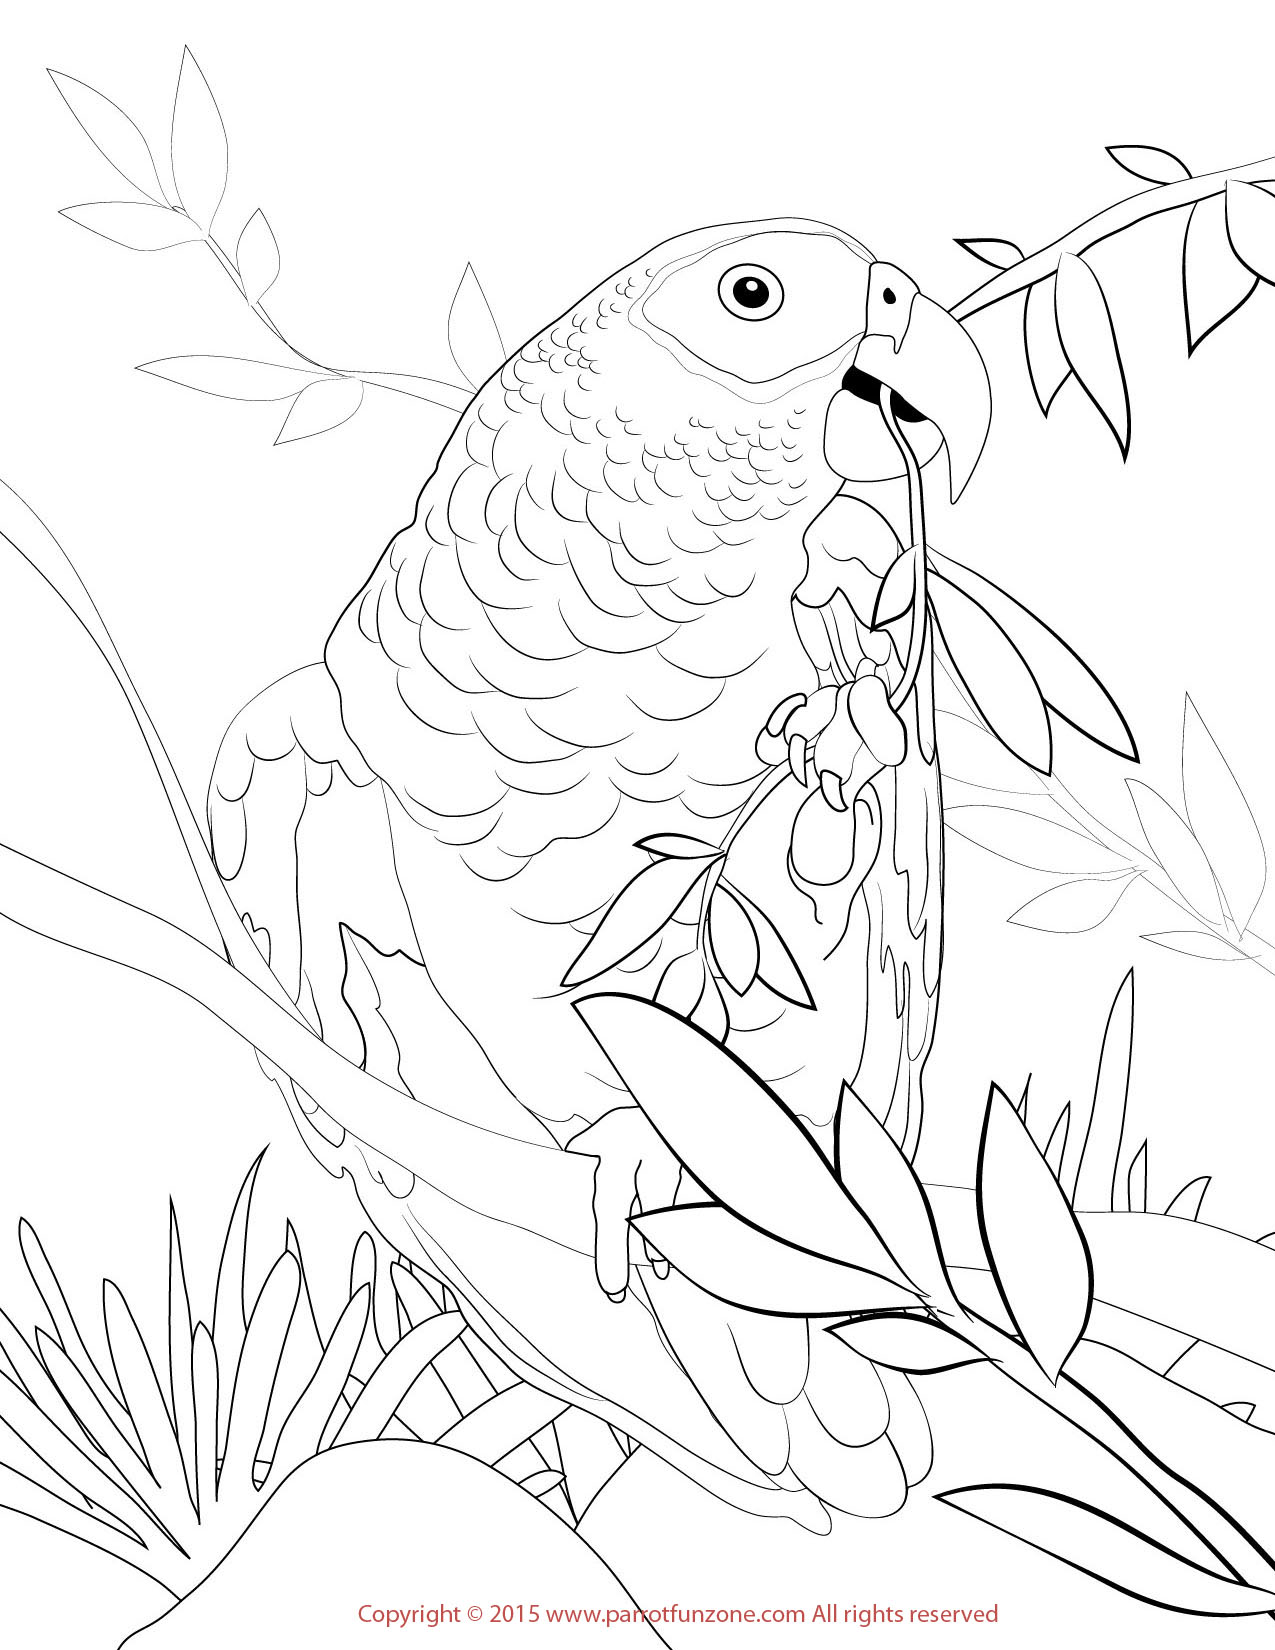 African Grey Parrot coloring #20, Download drawings